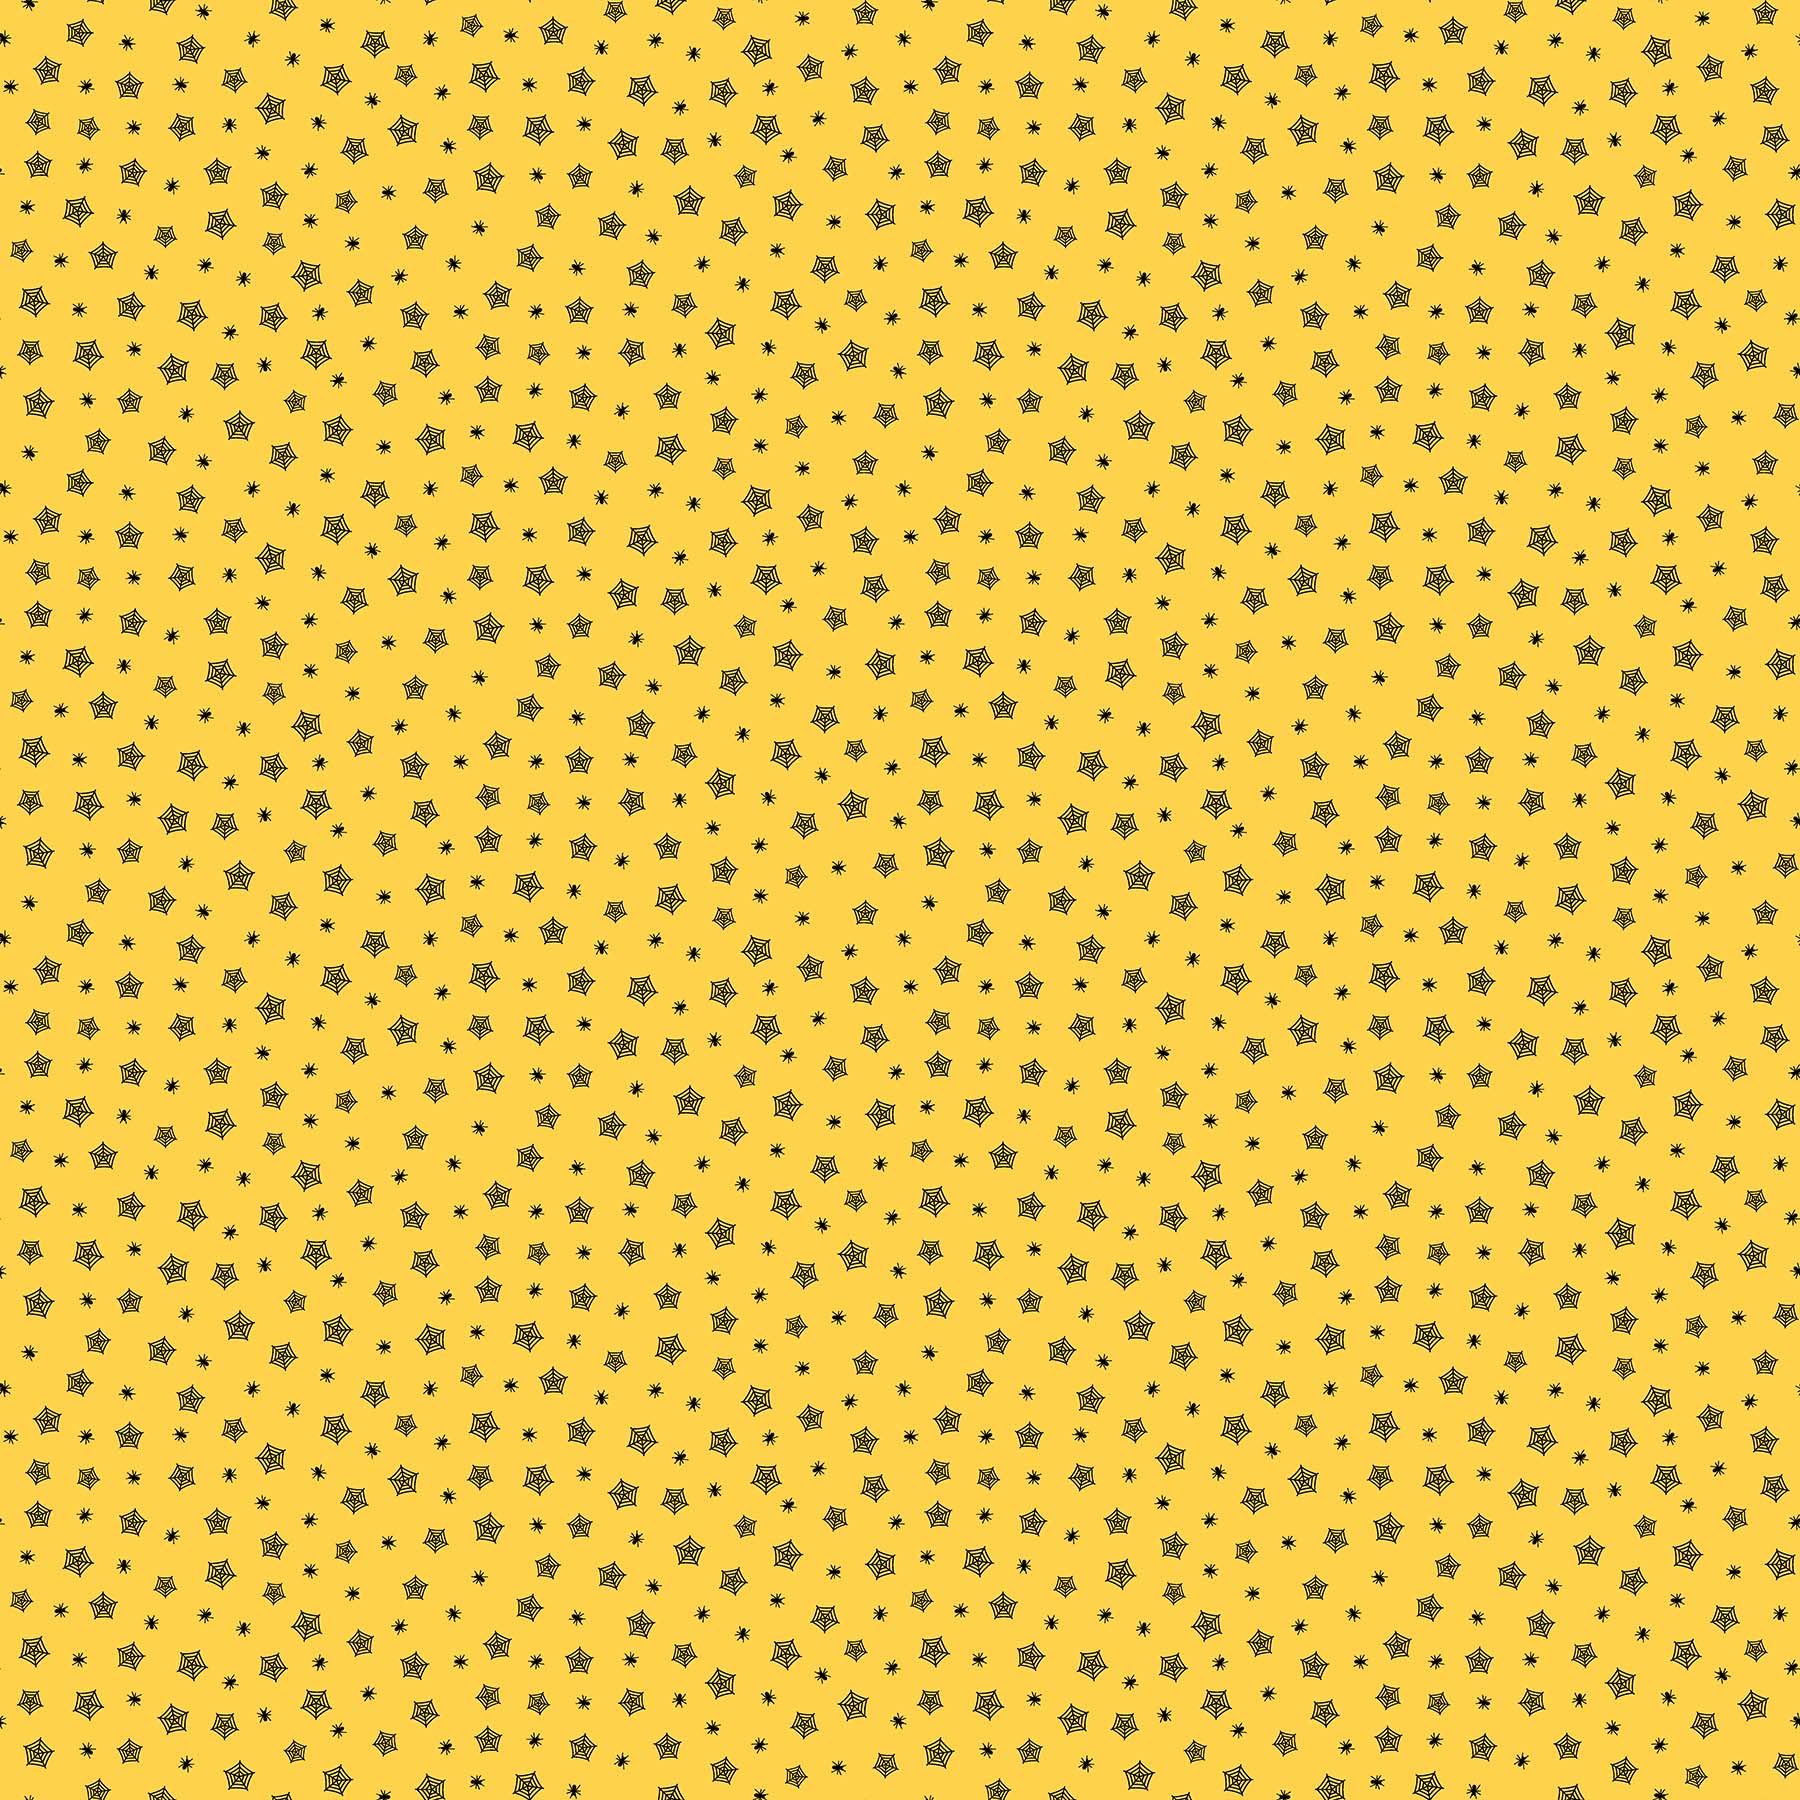 Fabric, Trick or Treat, Yellow 10479-54